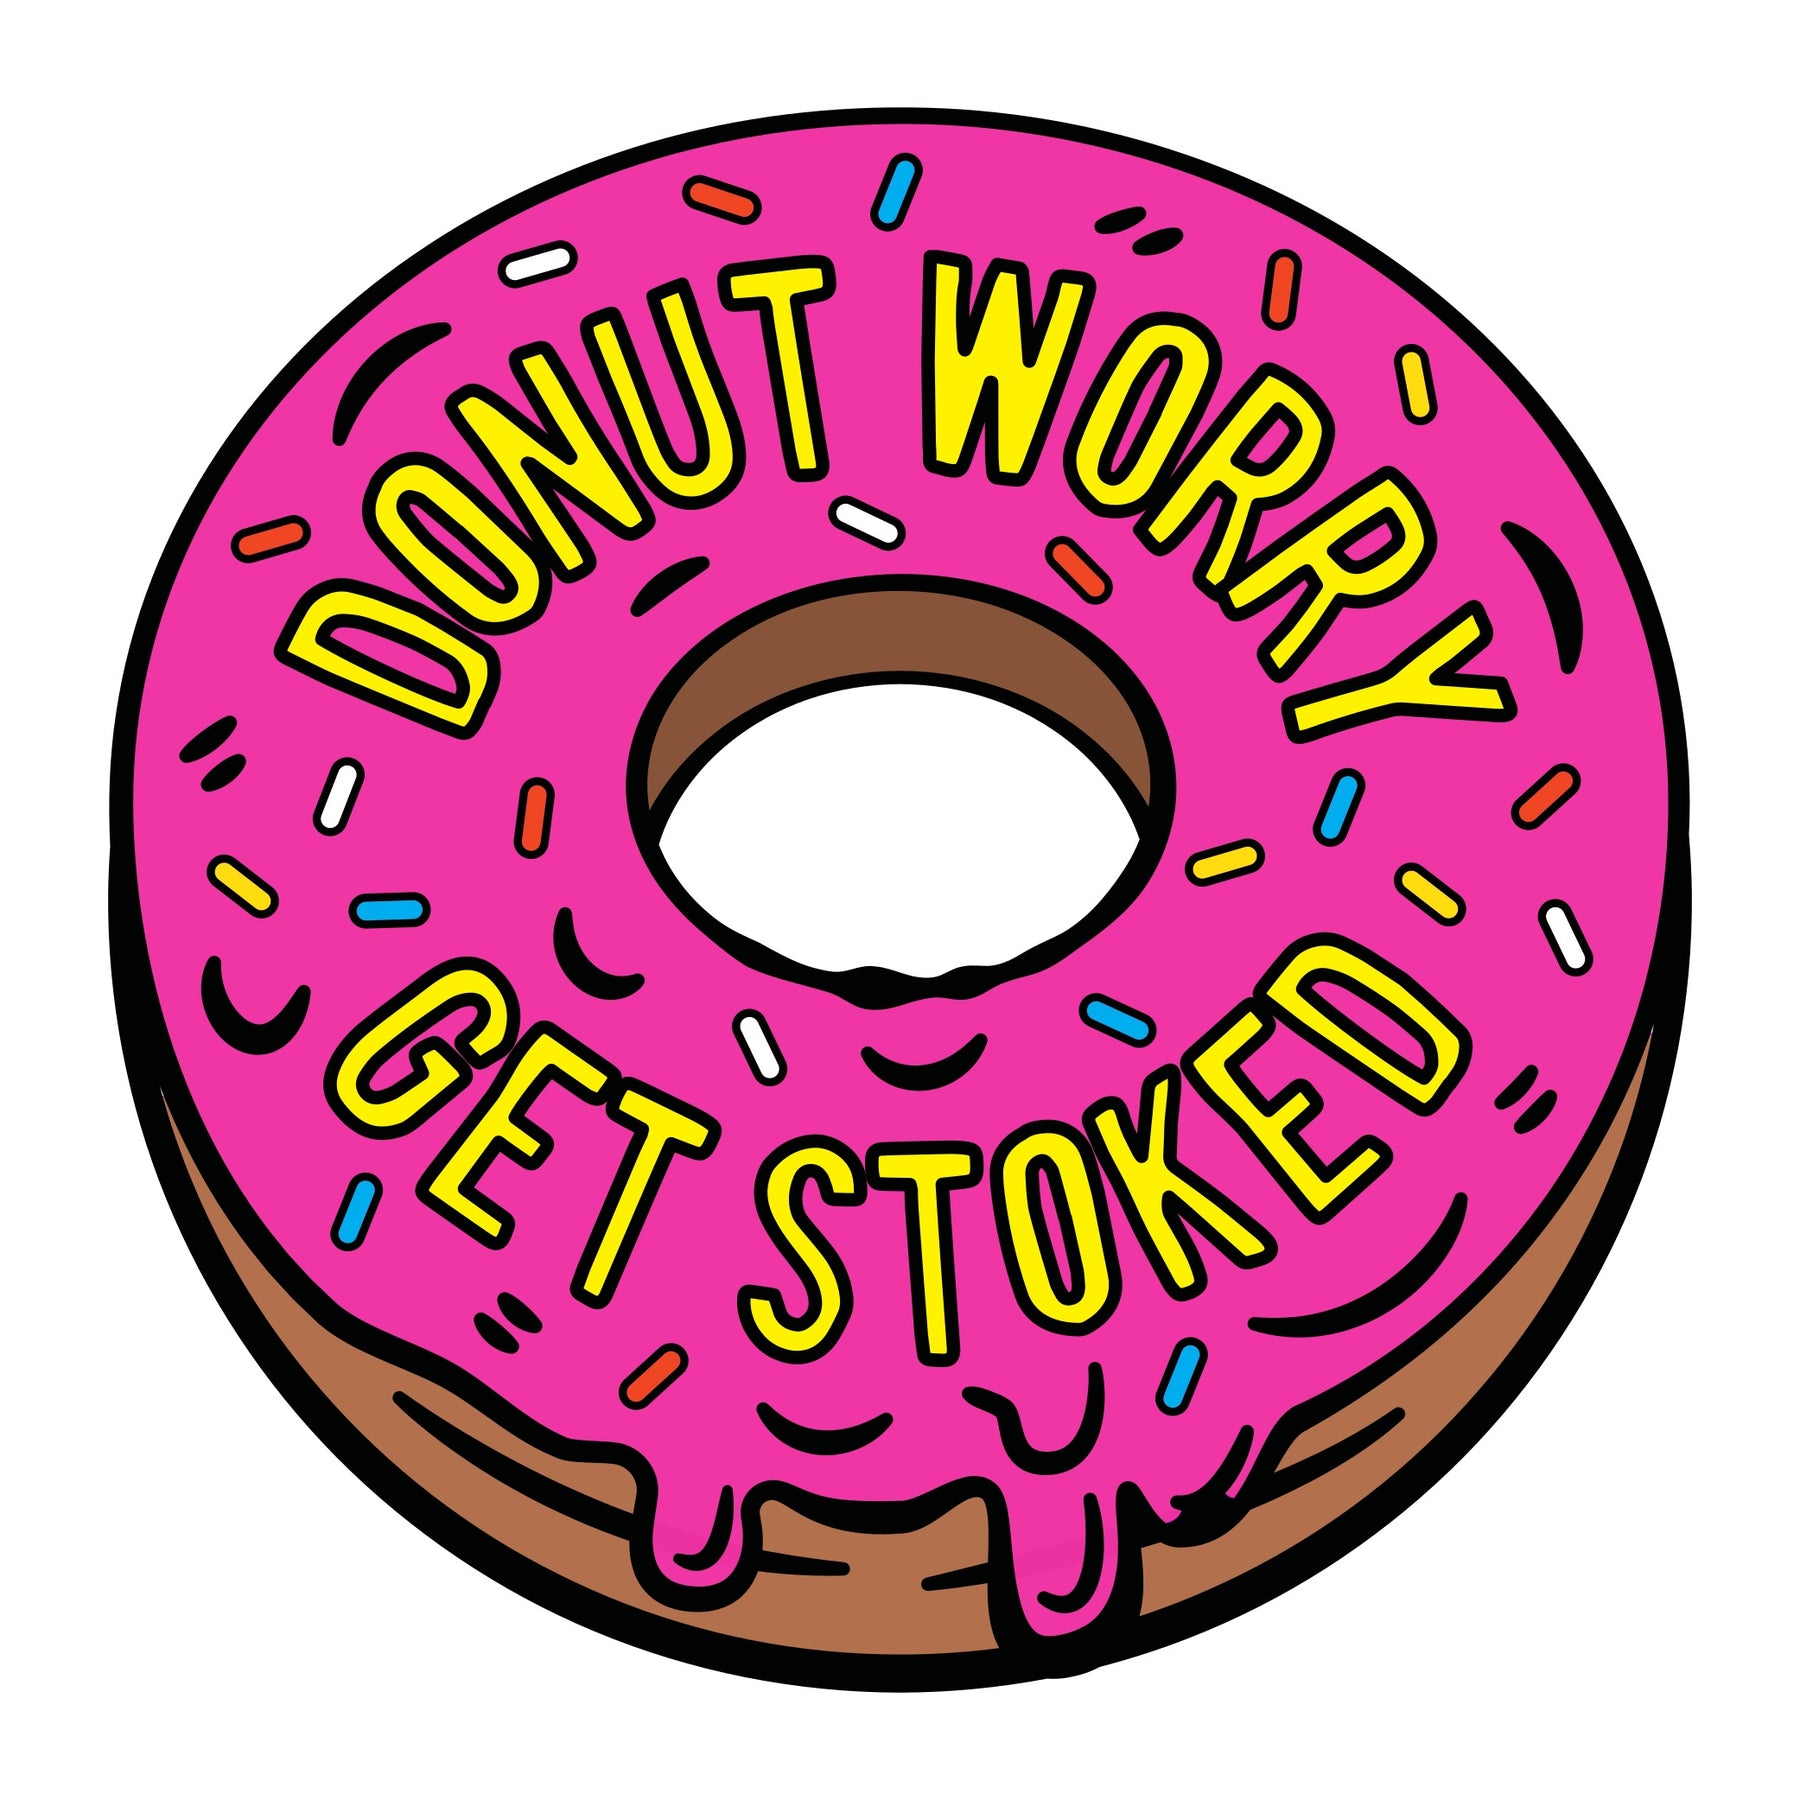 Stoked Ride Shop Sticker, Donut Worry